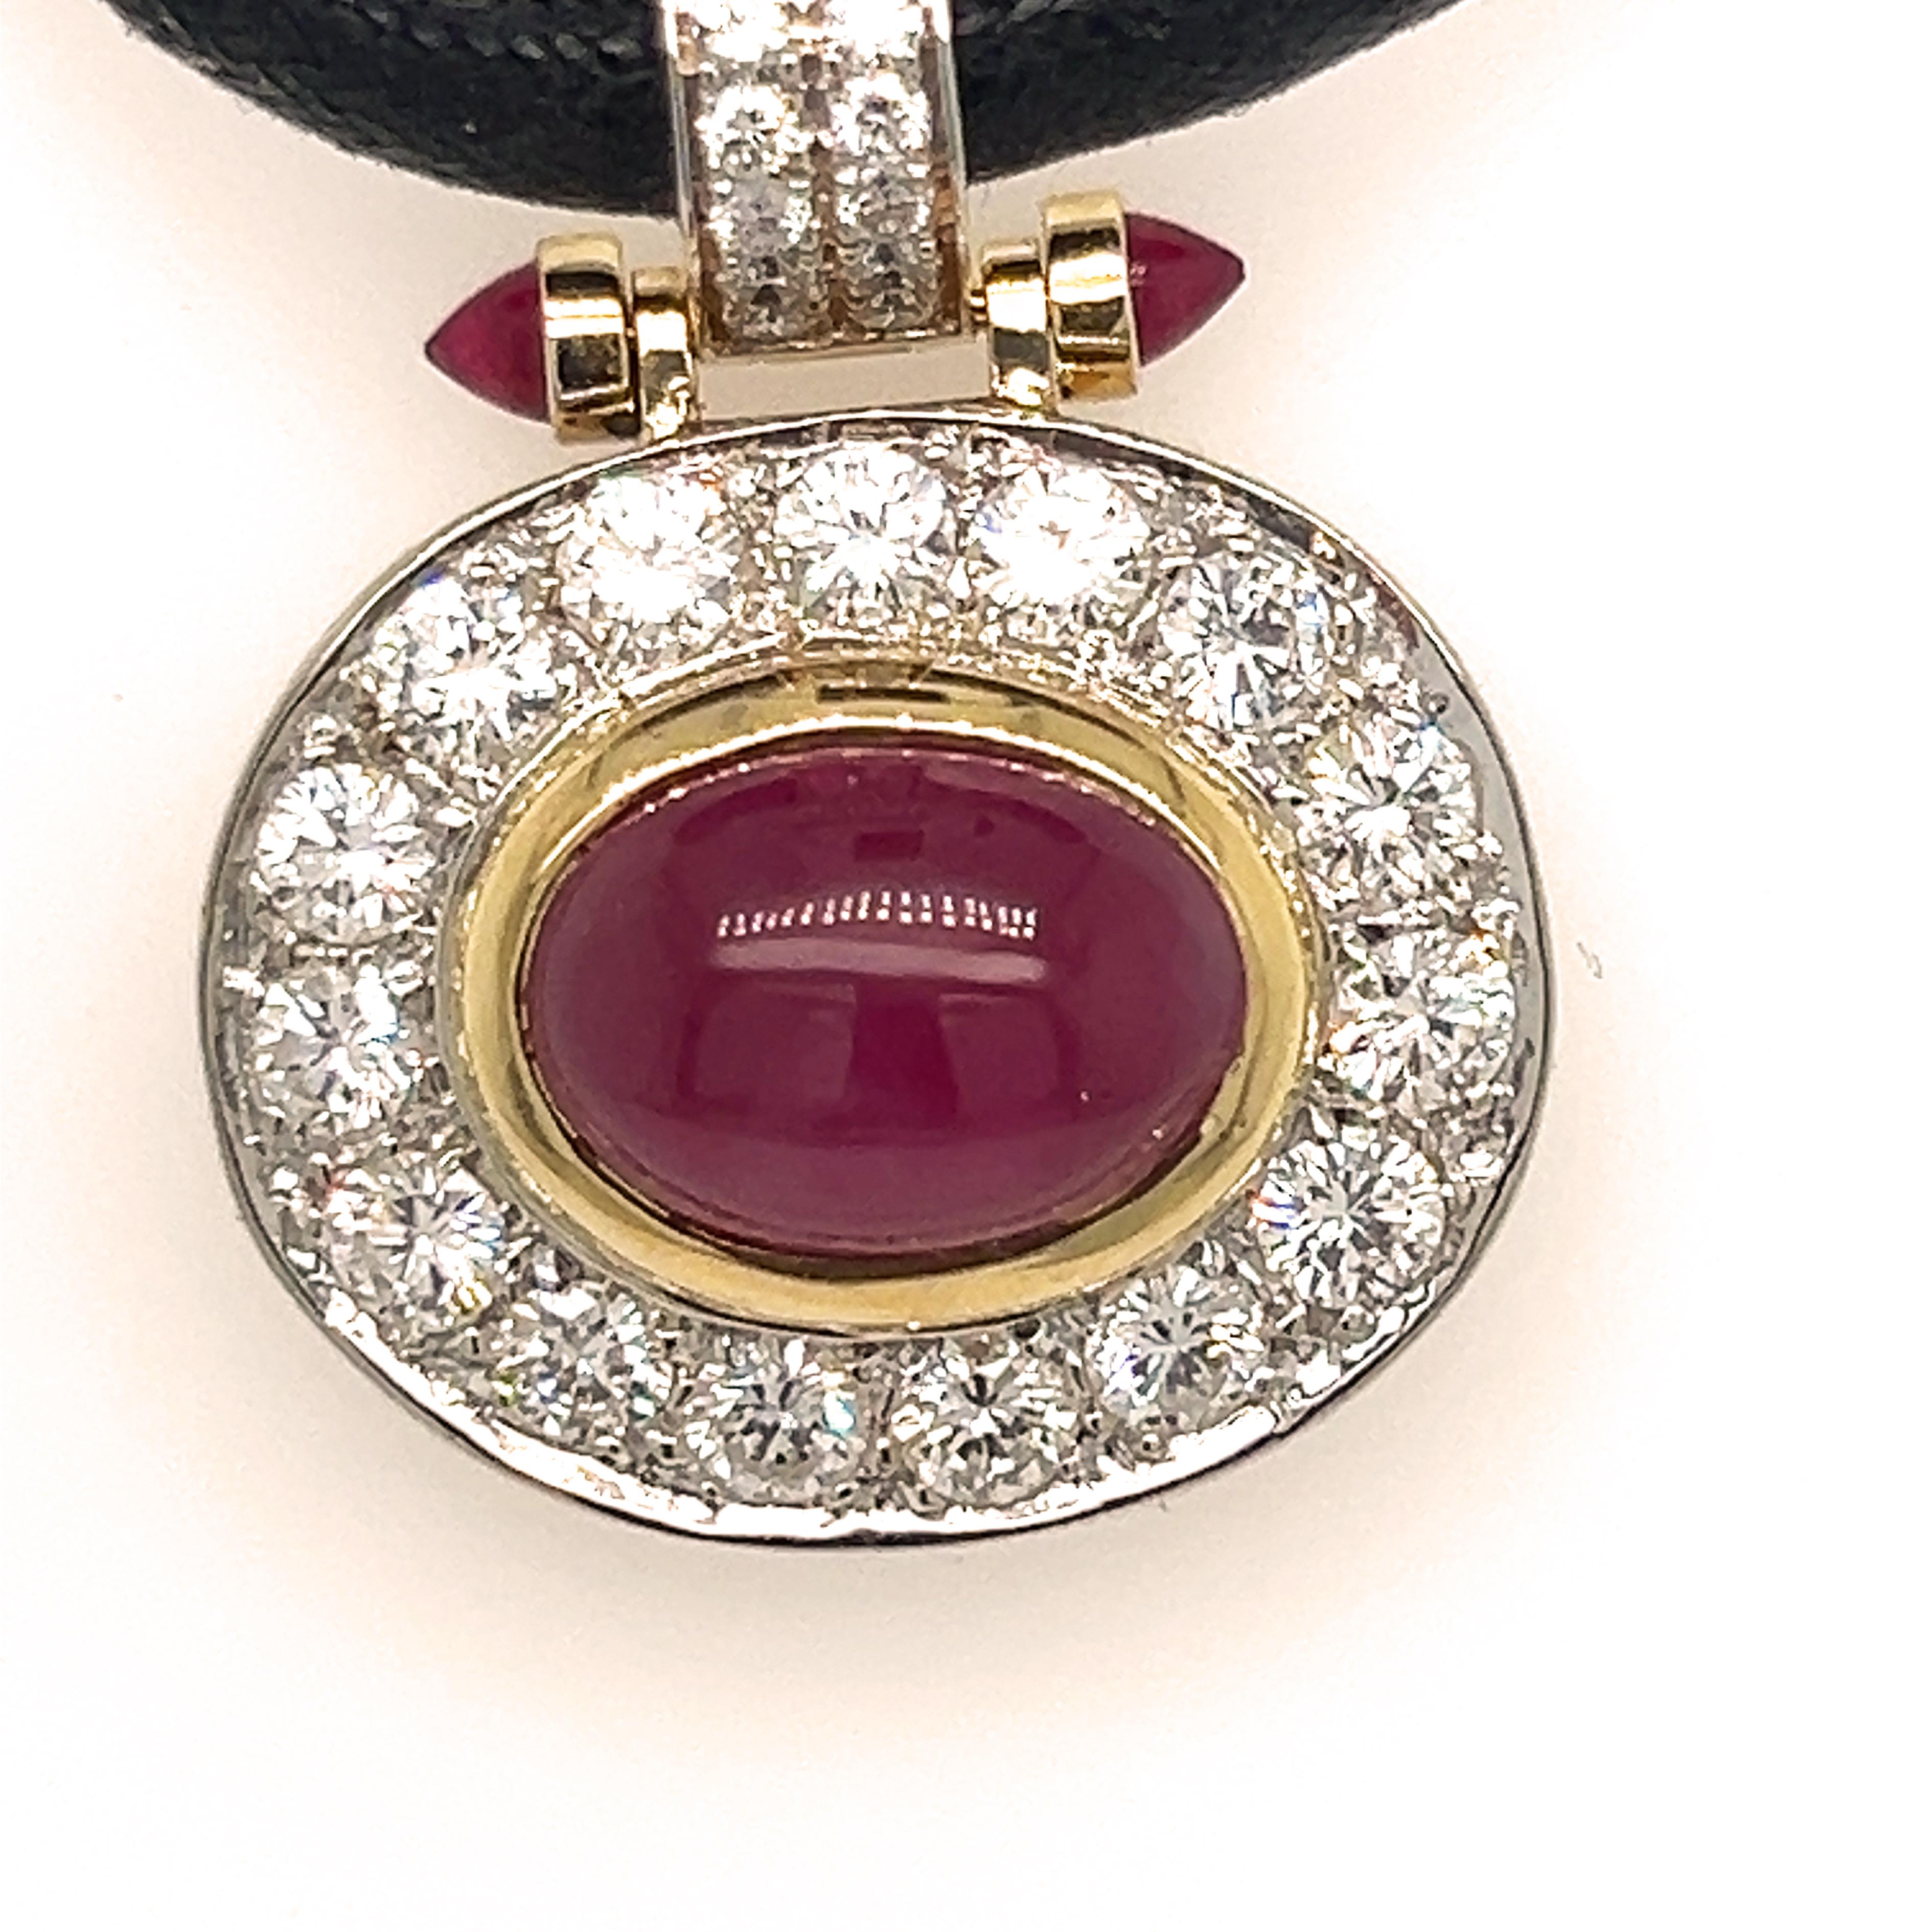 Extraordinary, One-of-a-kind, Original 1985, Bulgari  Pendant: this extremely versatile, absolutely chic piece is a beautiful example of Bulgari's golden age craftsmanship and creativity. The iconic Ruby Cabochon motif is here stylized in a